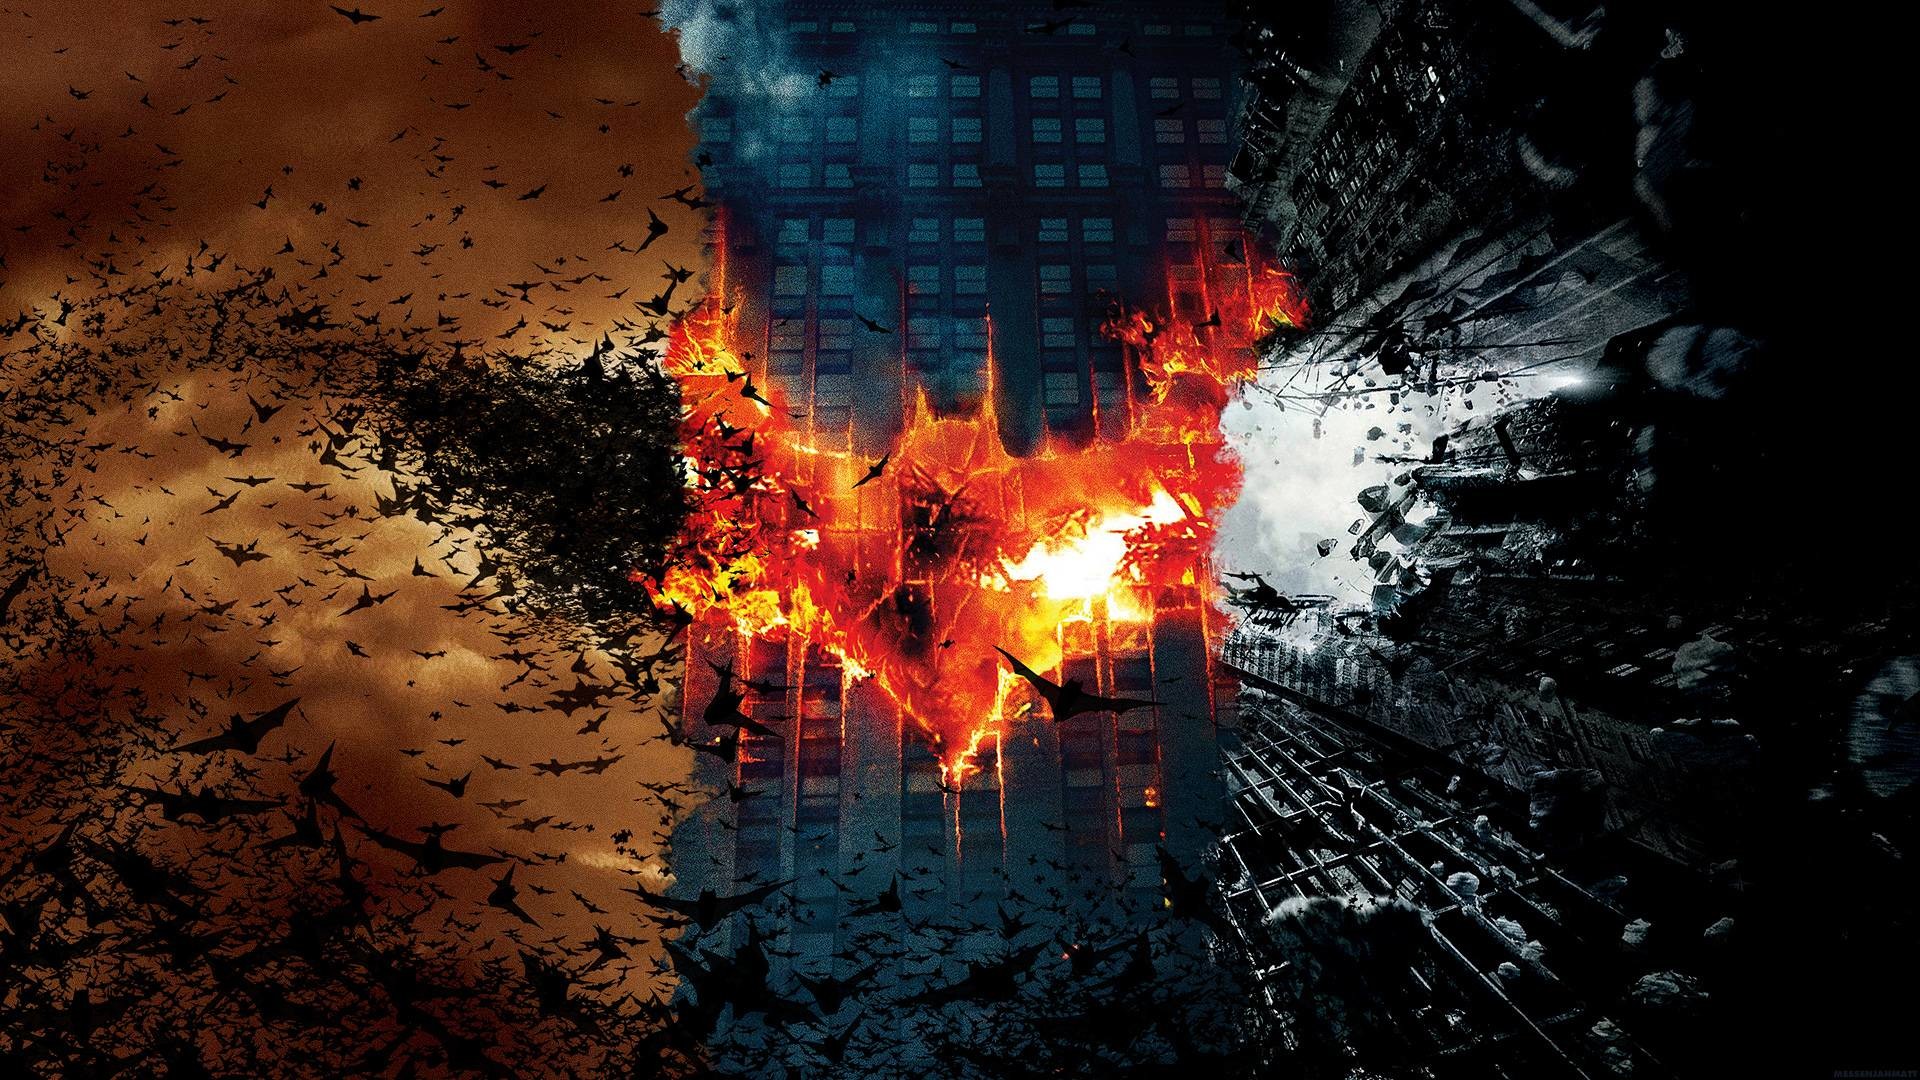 1920x1080 Dark Knight Movie Wallpaper and Photos | Cool Wallpapers